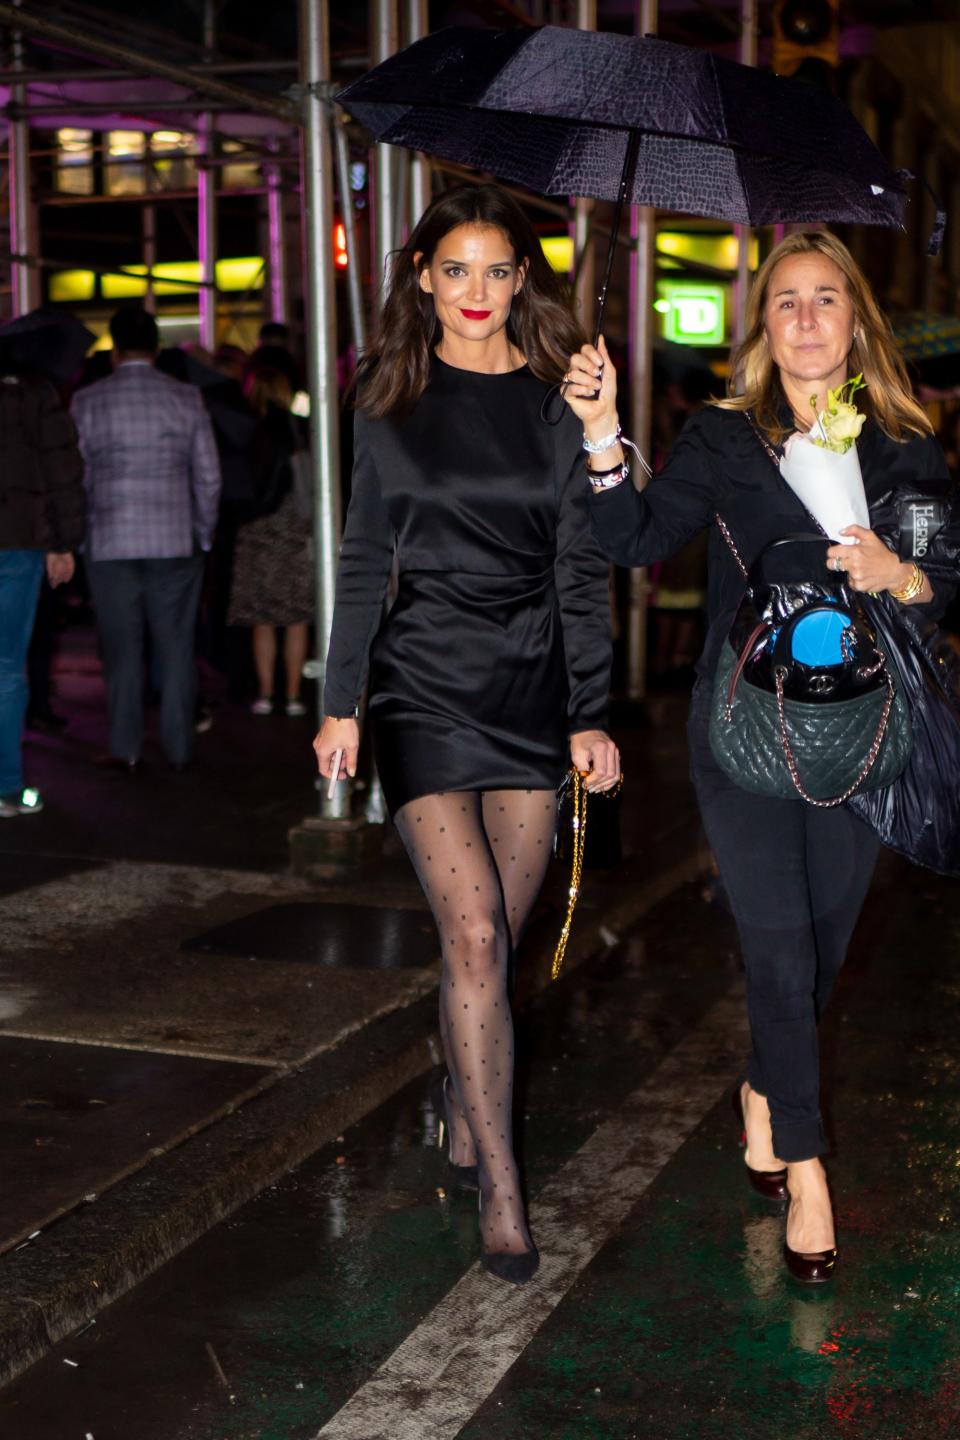 Holmes in New York City in a Saint Laurent dress on October 22, 2019.